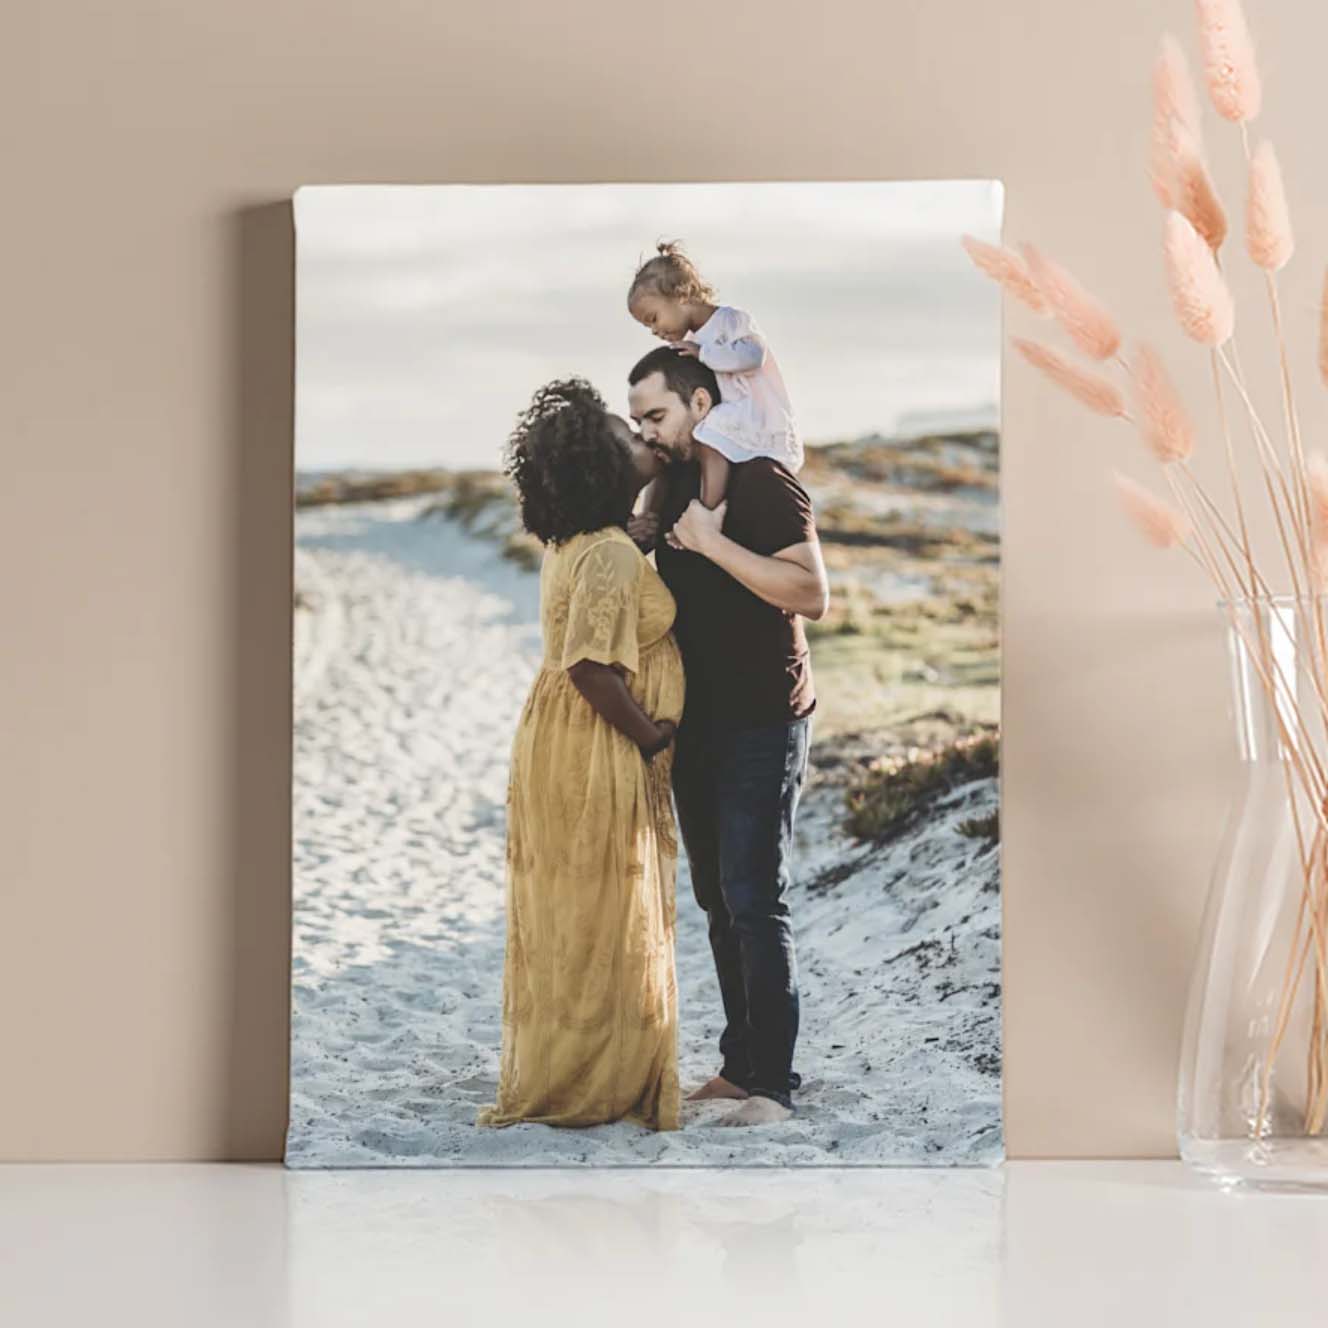 family photo printed on canvas